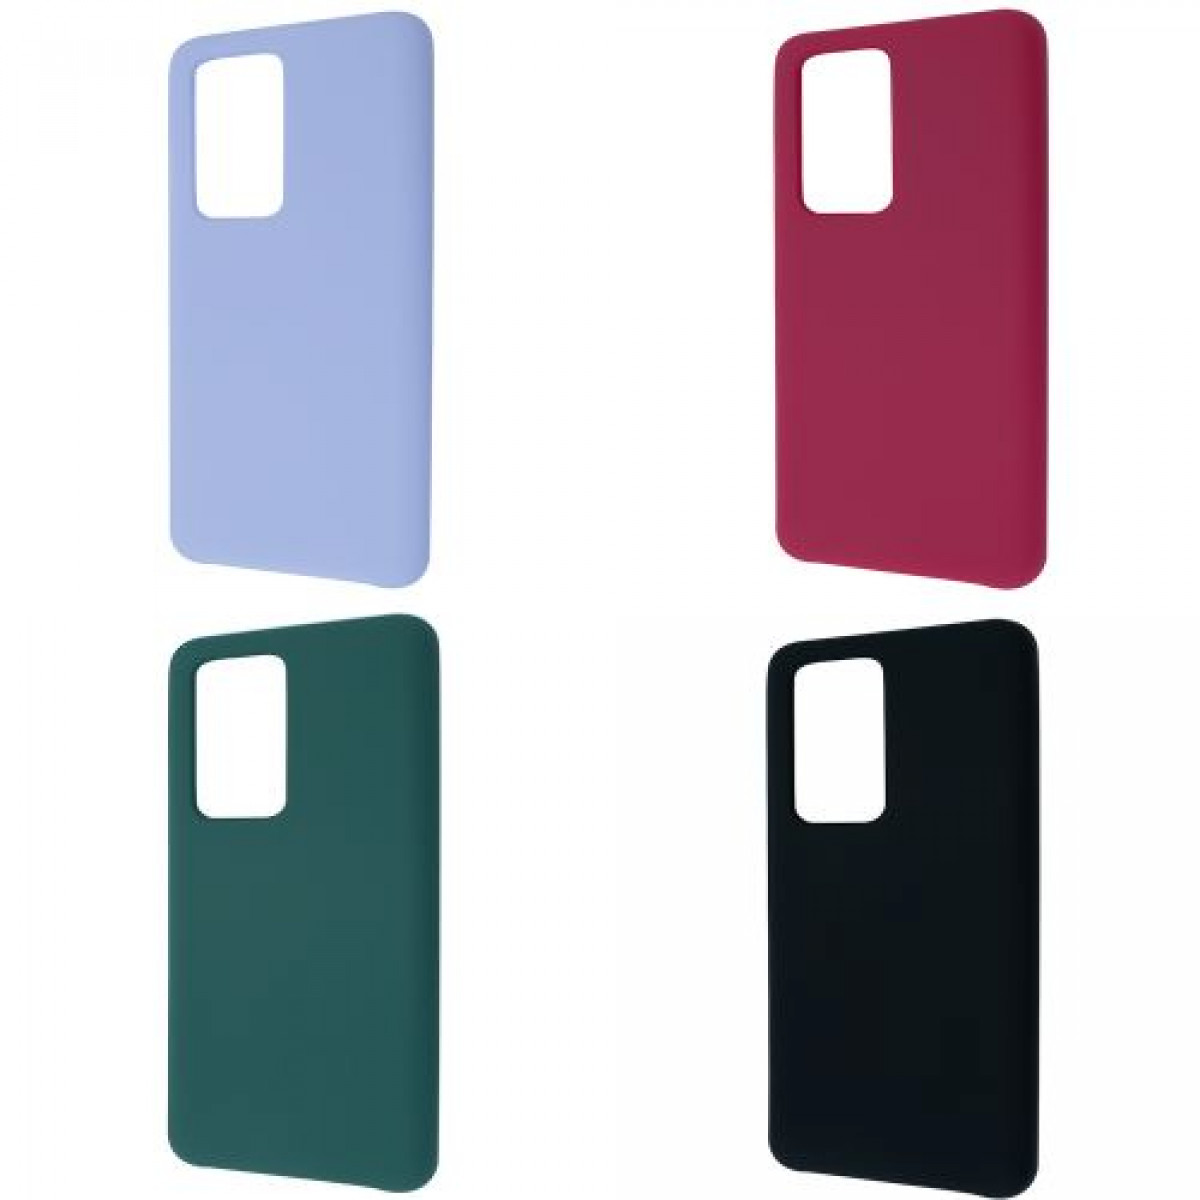 Silicone Cover no logo for Huawei P40 Pro